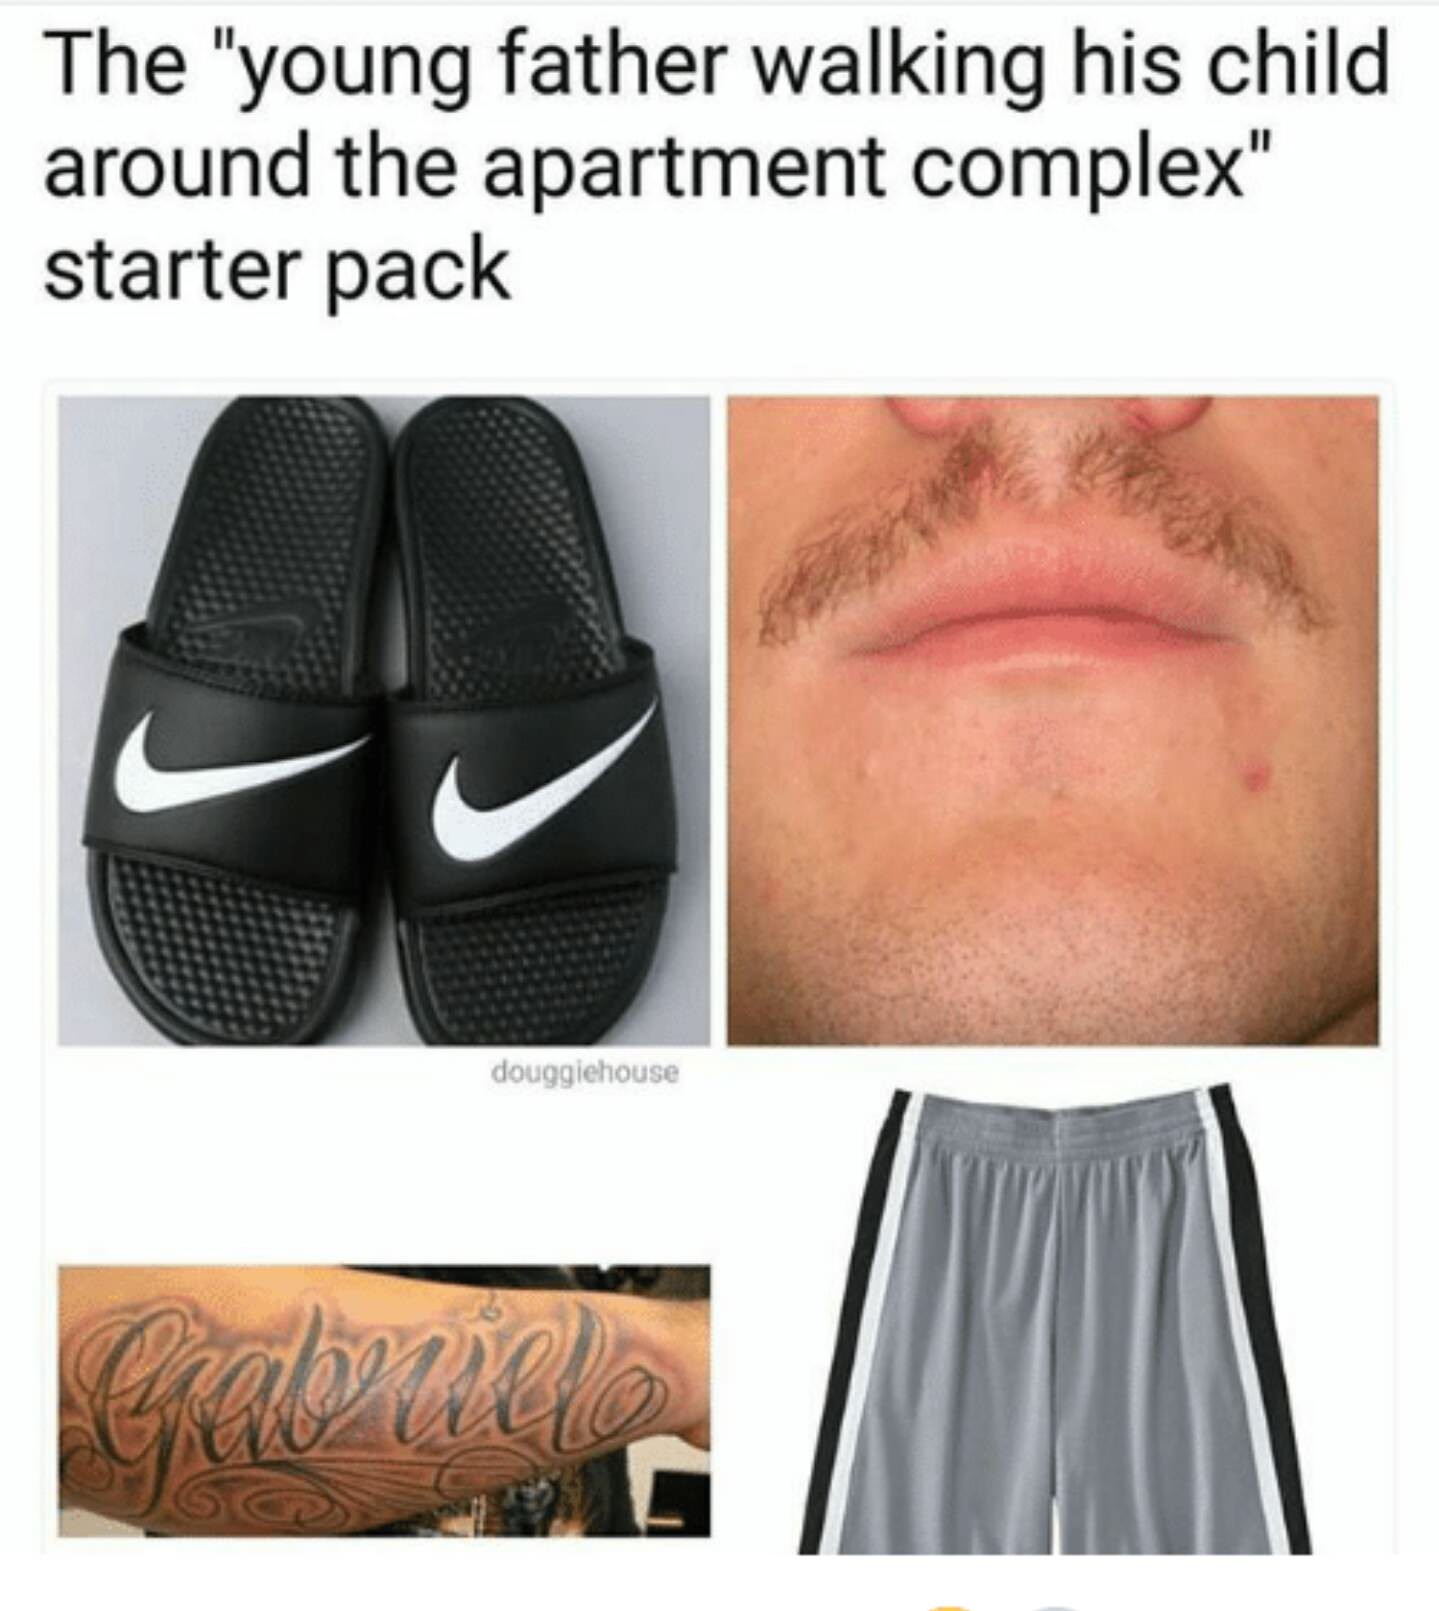 starter pack - young father walking his child around - The "young father walking his child around the apartment complex" starter pack douggiehouse